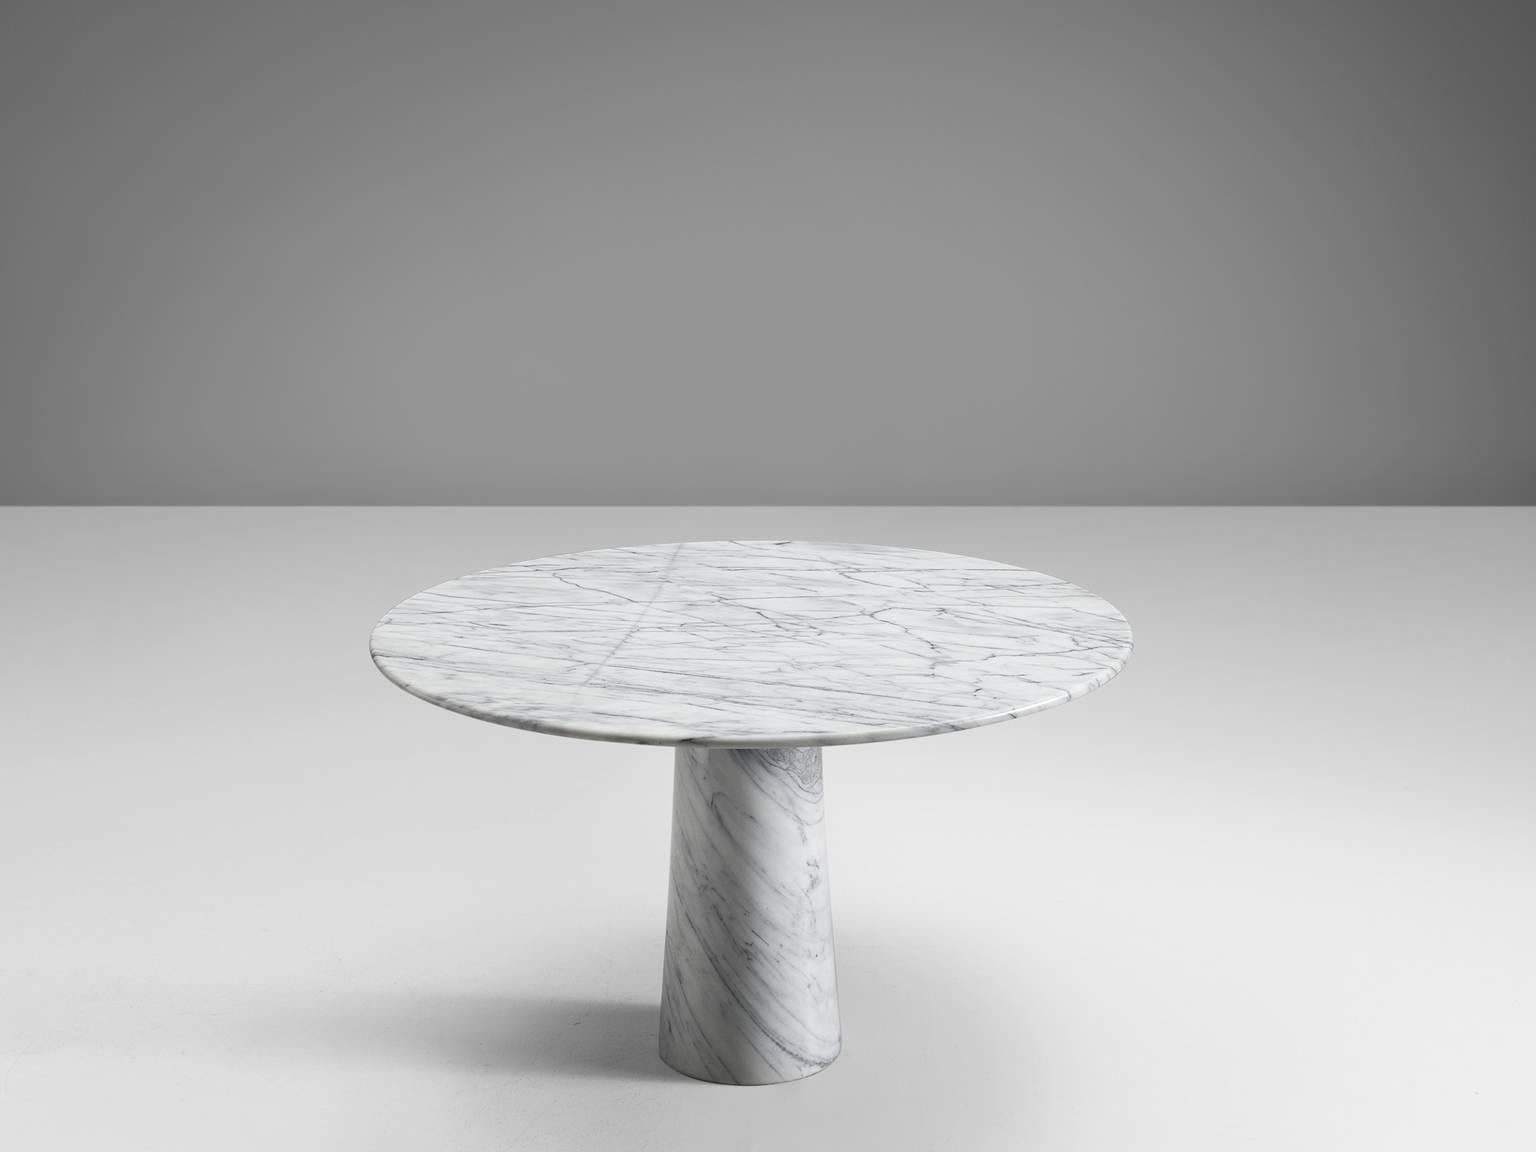 Dining table, marble, Italy, 1970s. 

This architectural table is a skillful example of postmodern design. The circular table features no joints or clamps and is architectural in its structure featuring one single column. The top is formed of a